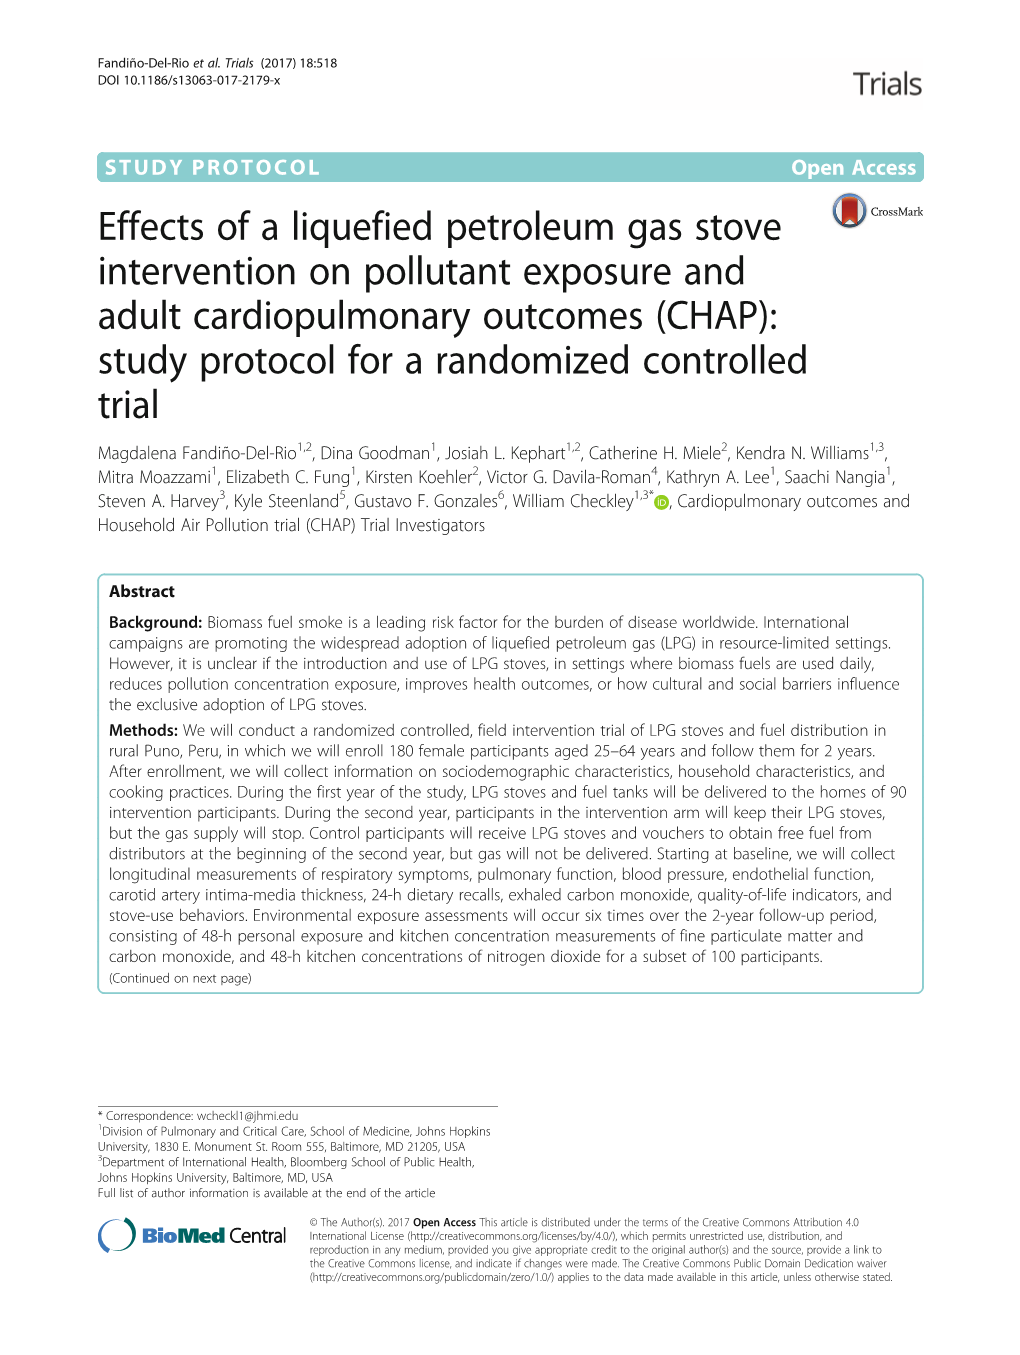 Effects of a Liquefied Petroleum Gas Stove Intervention on Pollutant